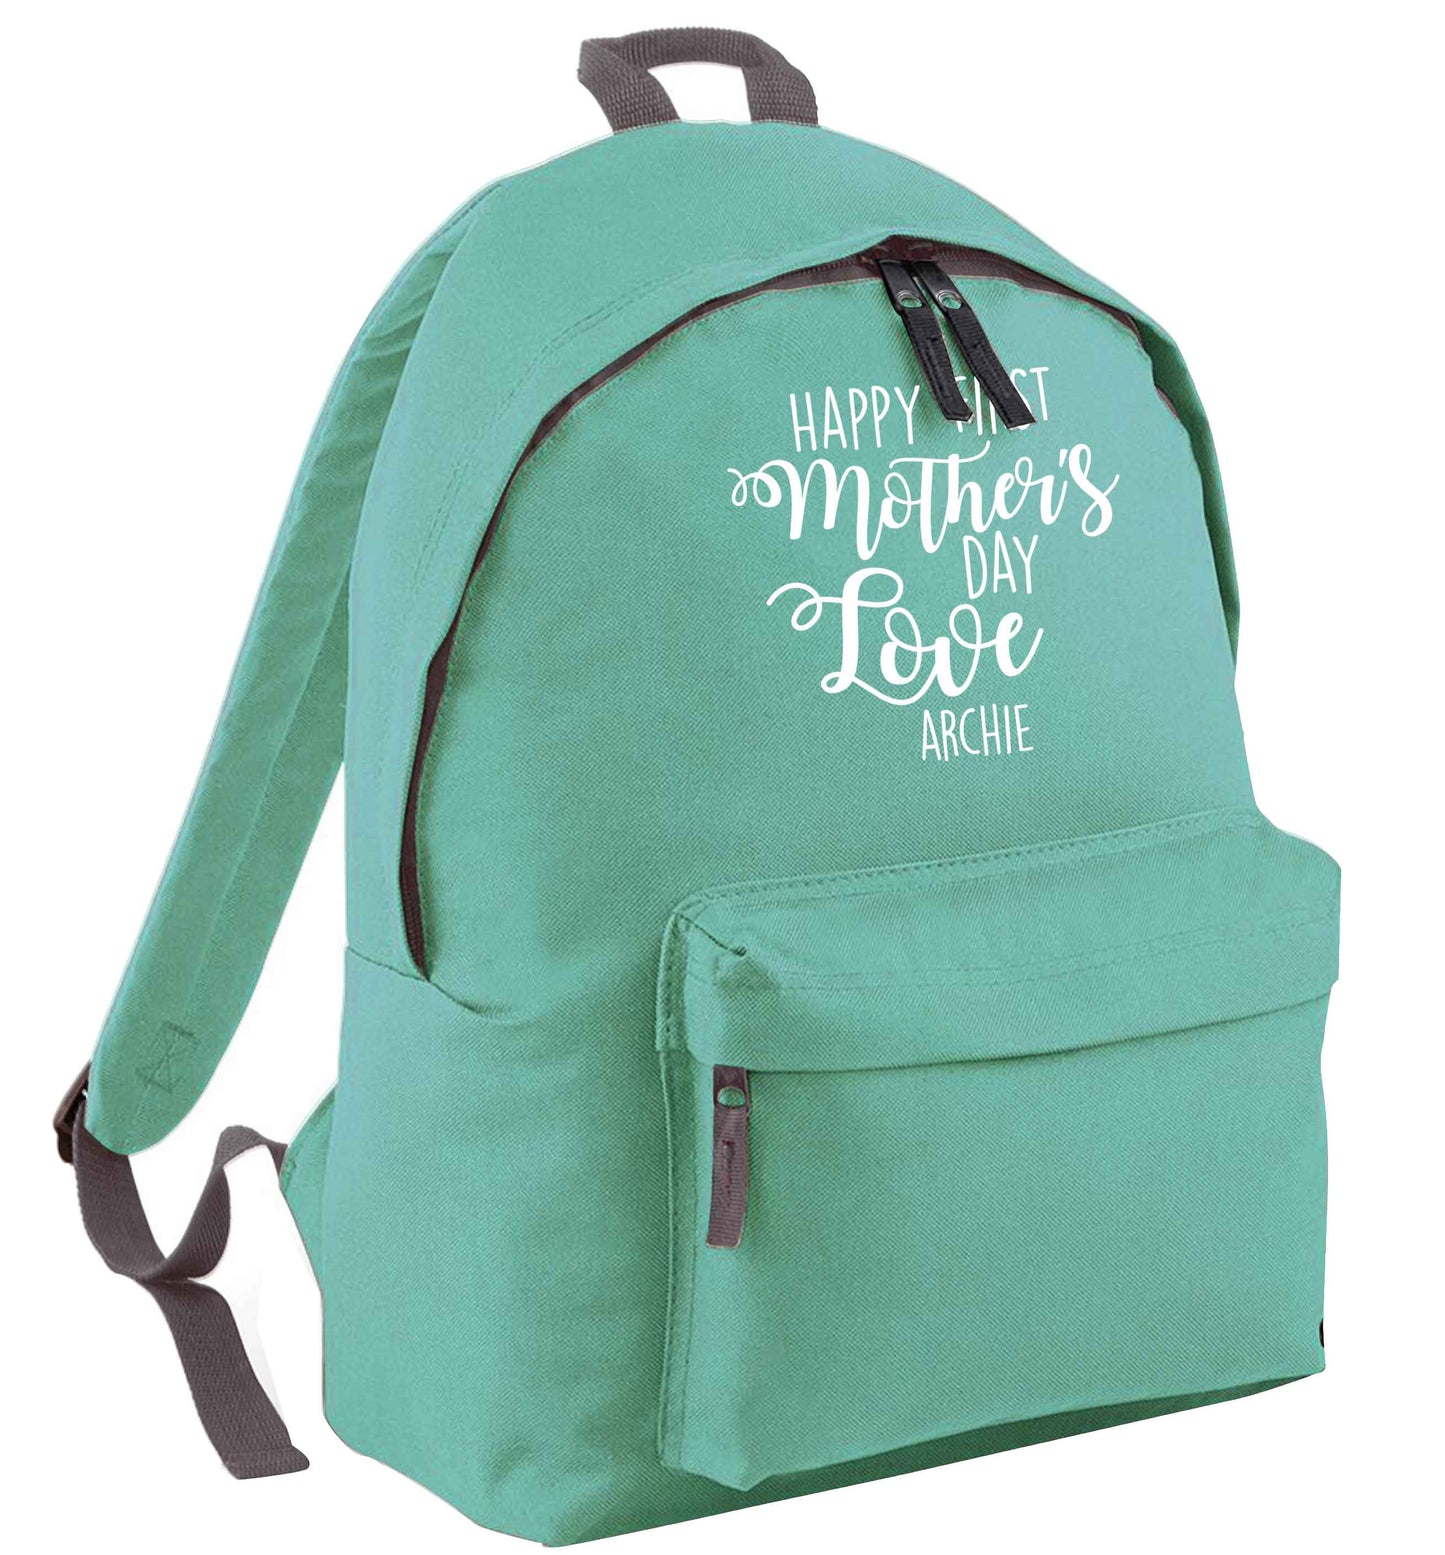 Mummy's first mother's day! mint adults backpack